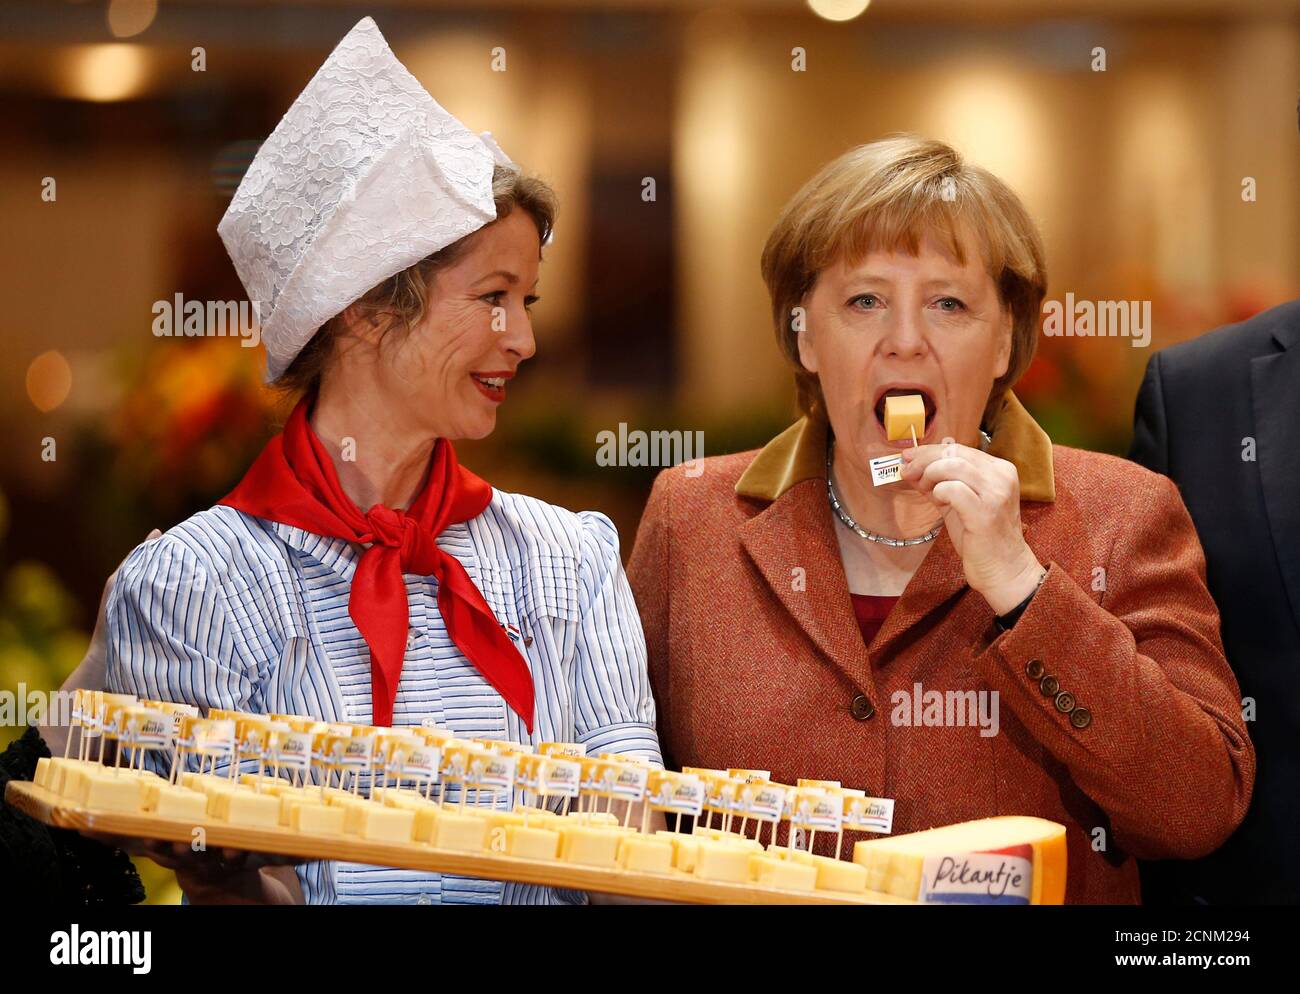 German Chancellor Angela Merkel (R) samples cheese at the pavilion of the Netherlands at the Green Week agricultural fair in Berlin, January 18, 2013. The Netherlands are the partner nation of the Green Week this year.  REUTERS/Thomas Peter  (GERMANY  - Tags: POLITICS AGRICULTURE) Stock Photo